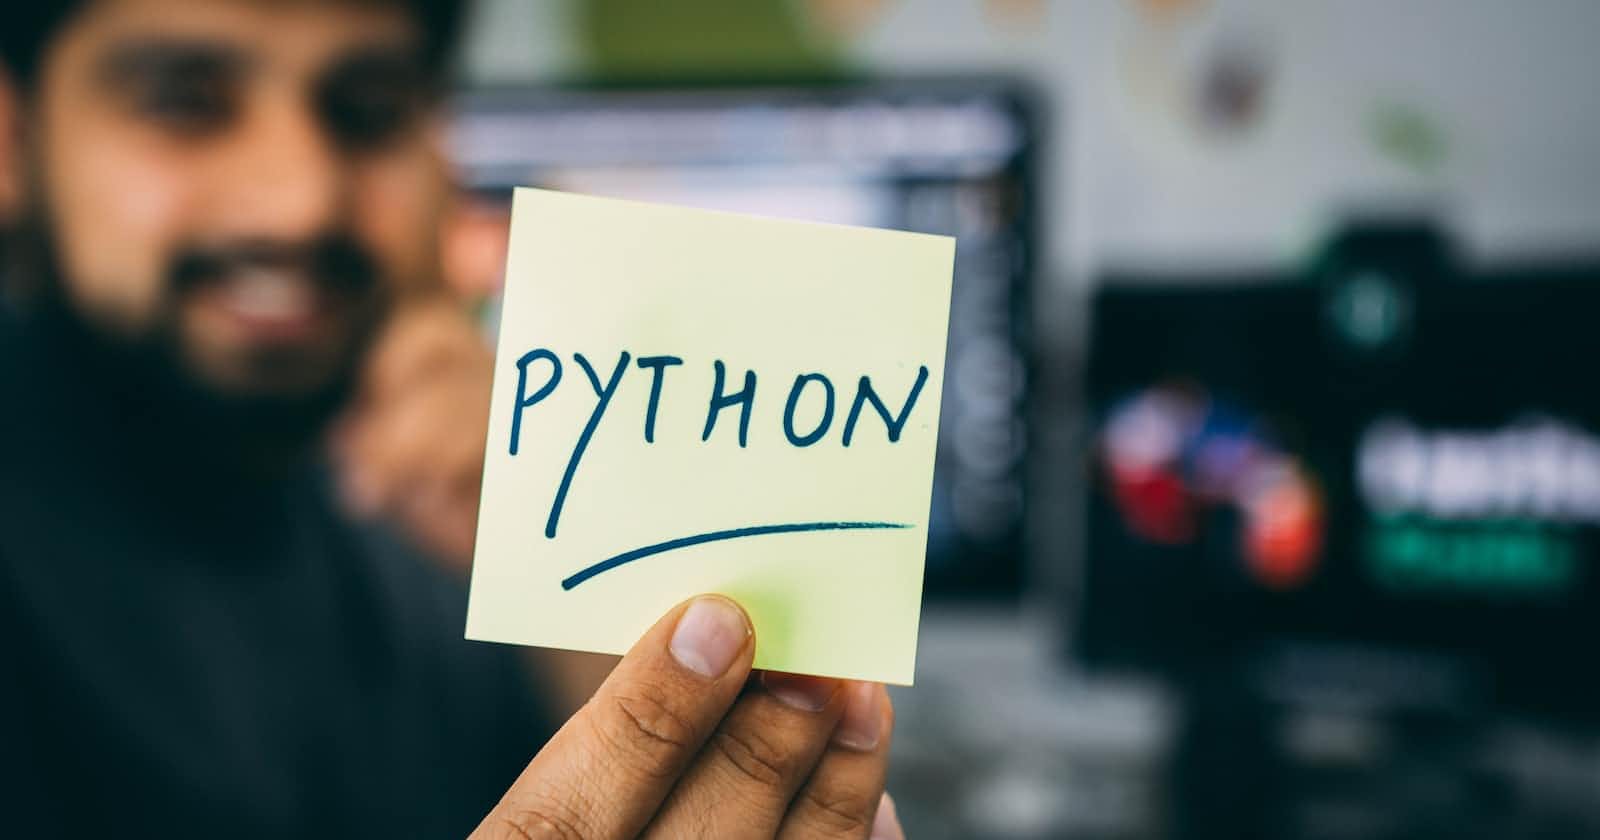 13 Powerful Python Snippets To Automate Tasks